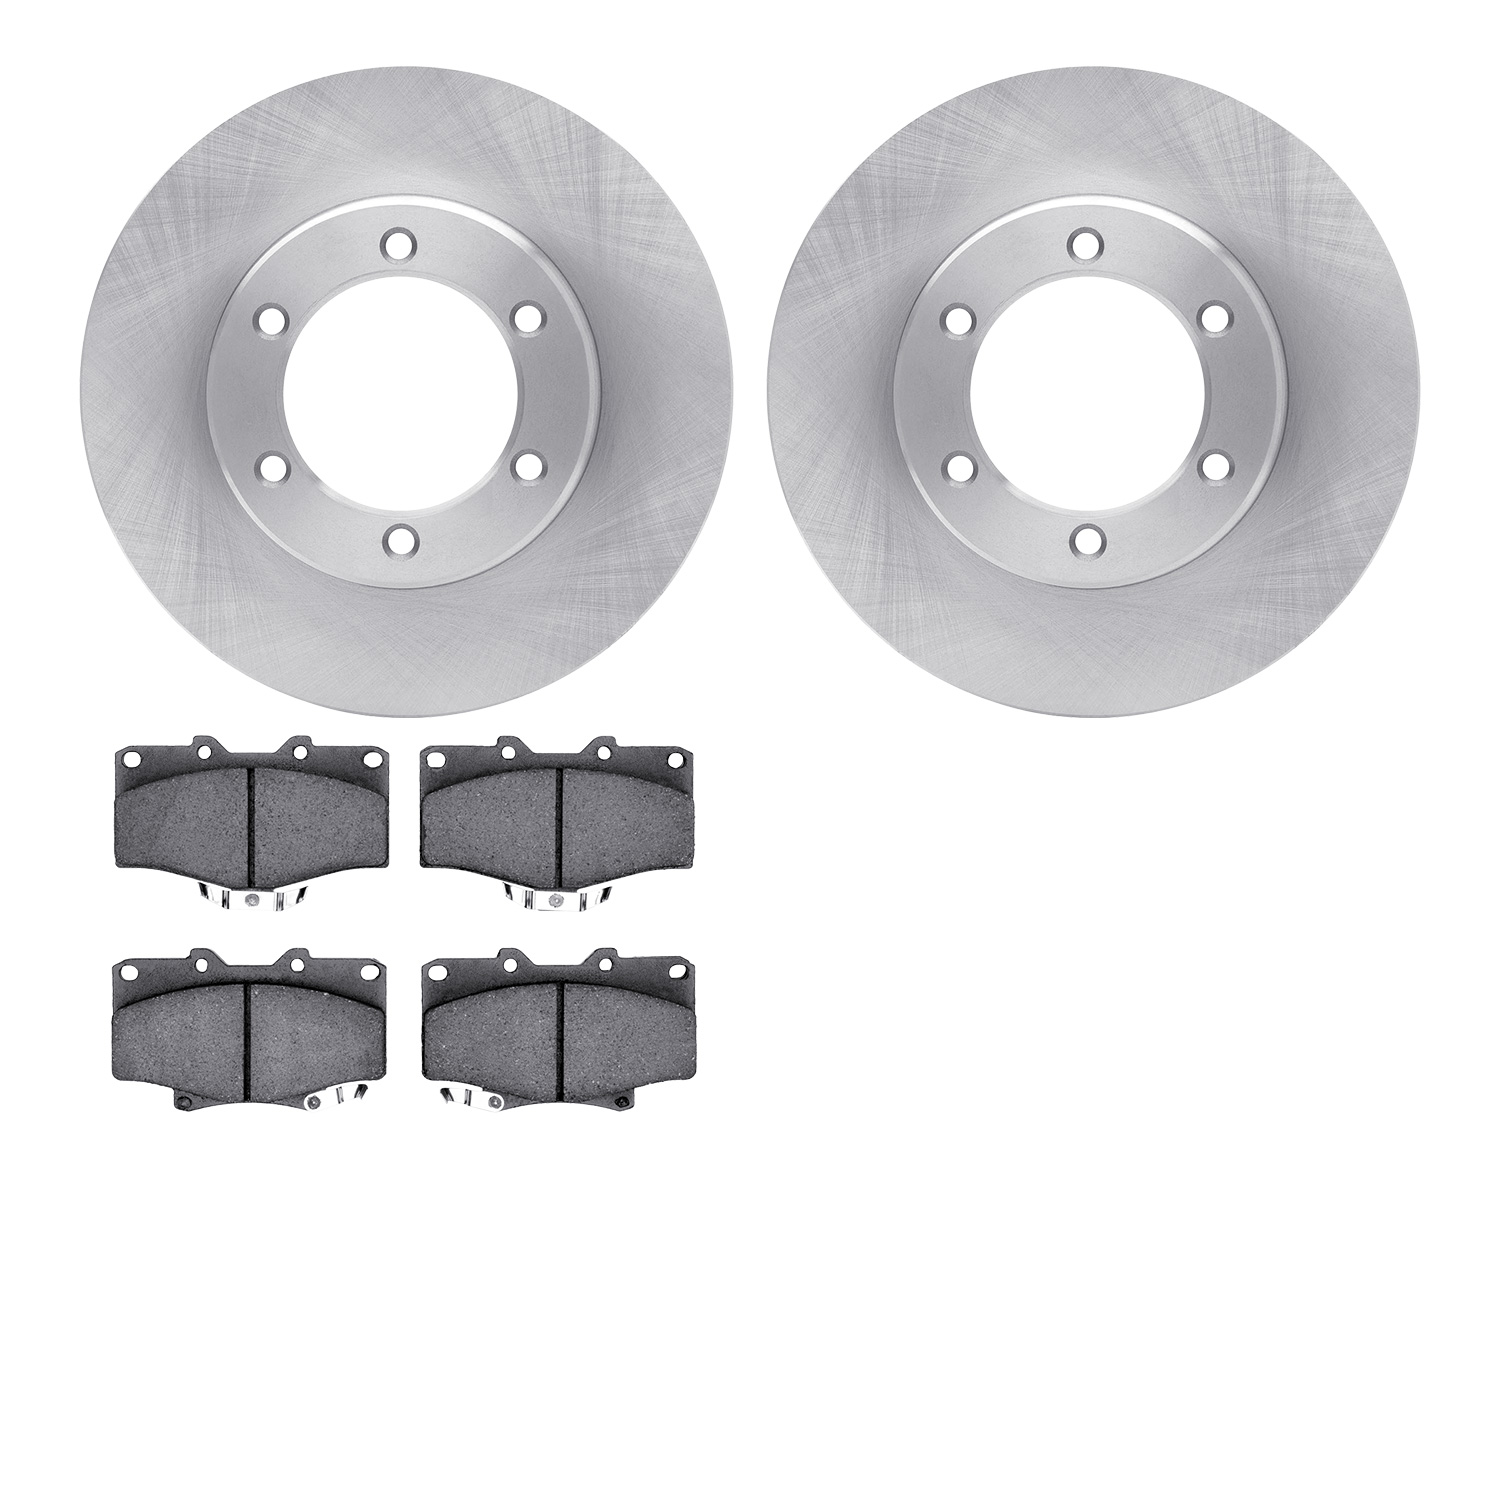 6402-76025 Brake Rotors with Ultimate-Duty Brake Pads, 1991-1998 Lexus/Toyota/Scion, Position: Front